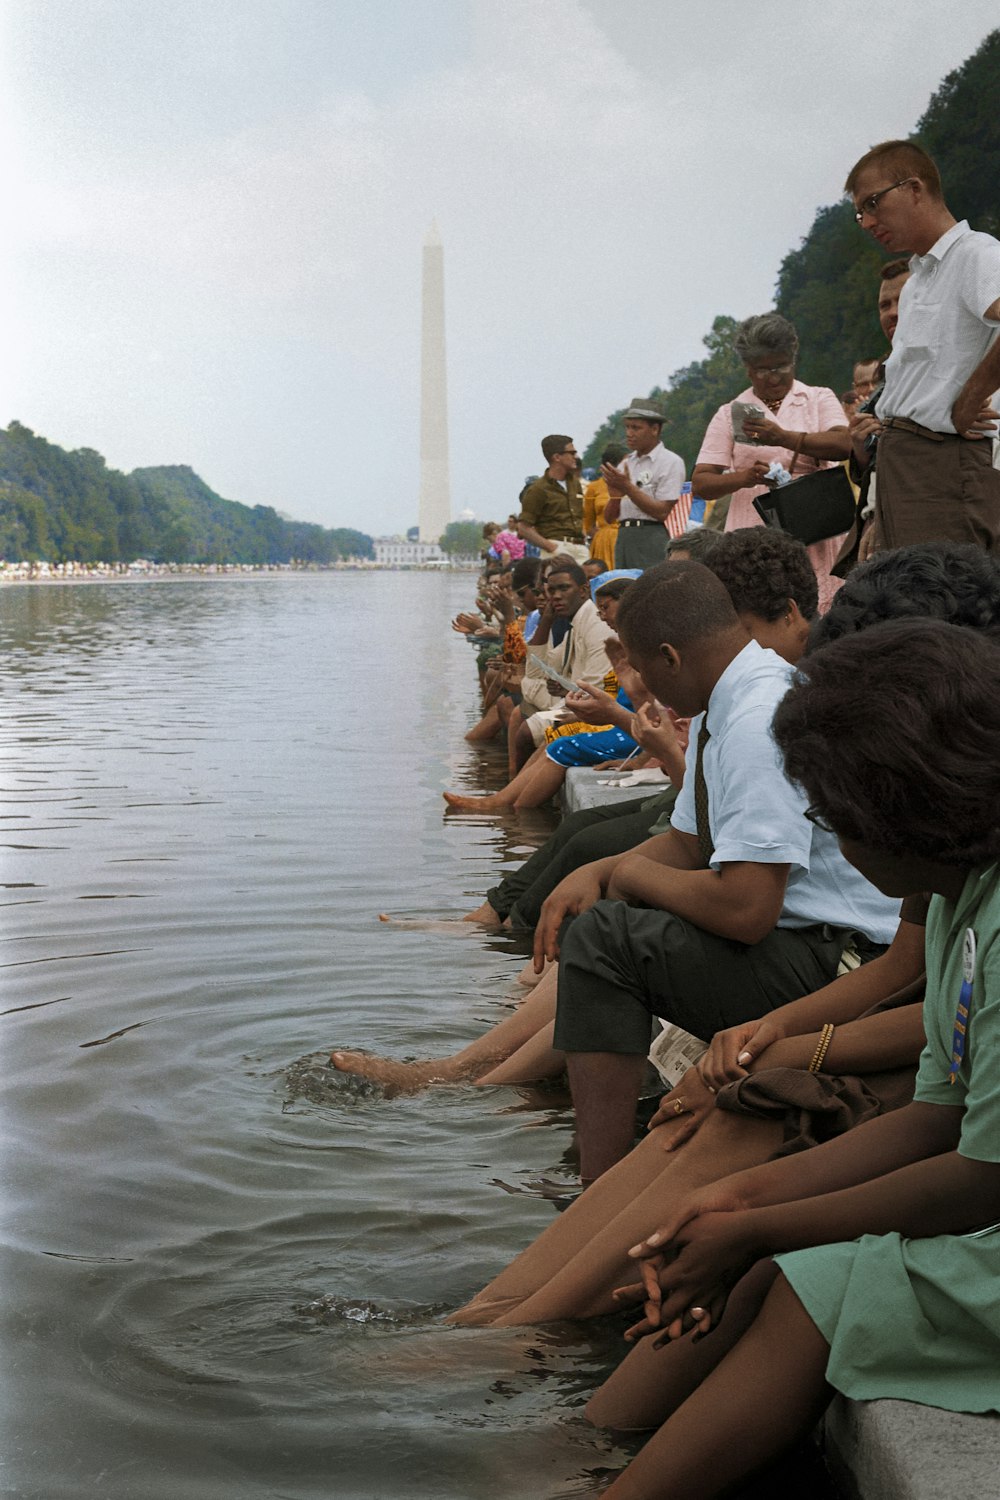 Demonstrators sit with their feet in the Reflecting Pool during the March on Washington in 1963